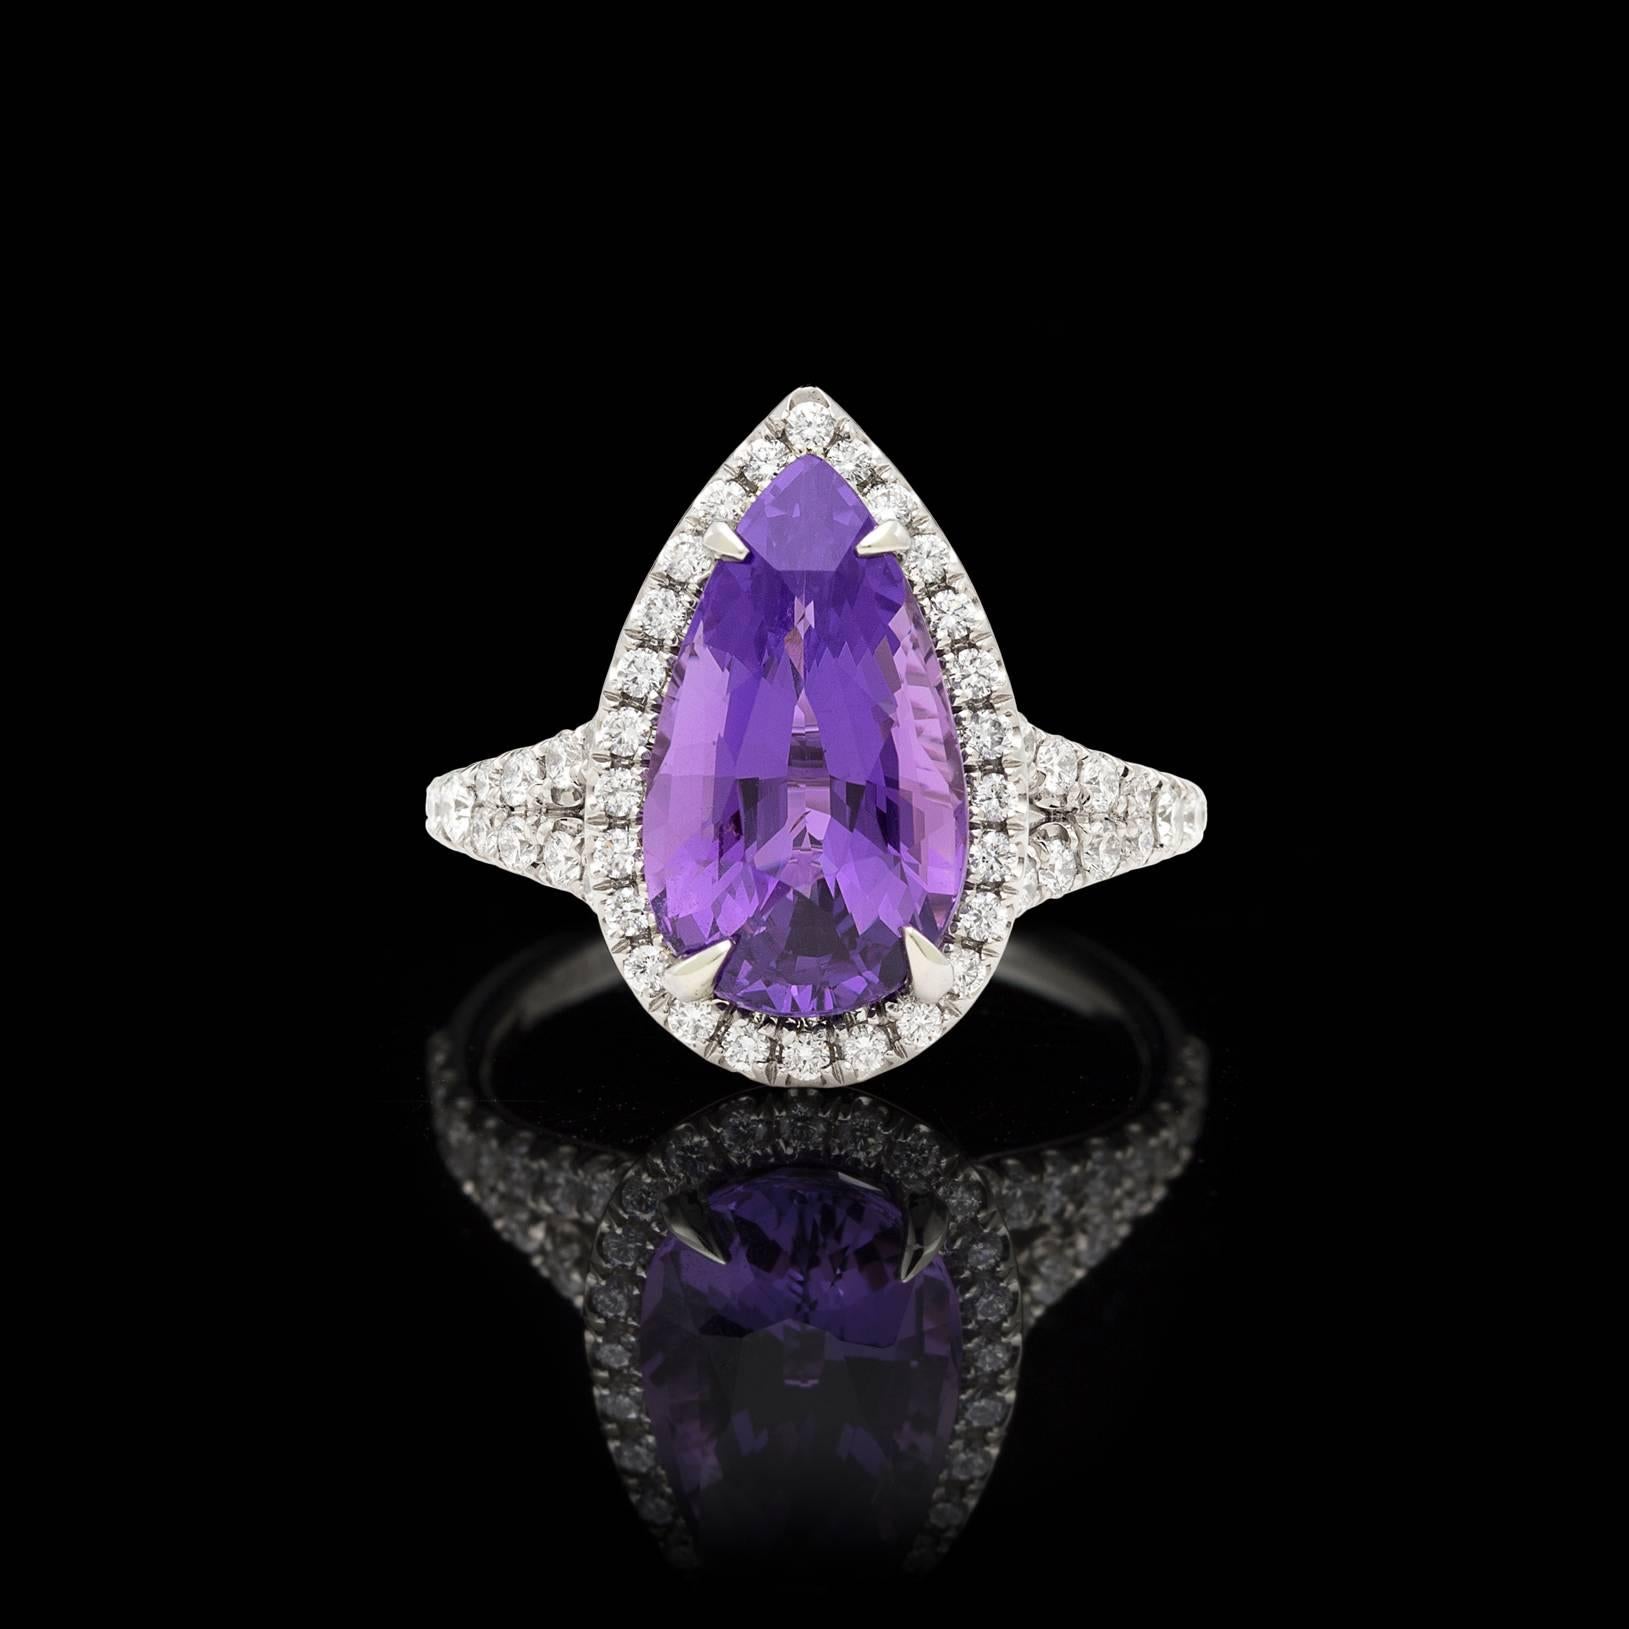 A true one of a kind! This custom split shank platinum ring features a spectacular GIA graded Unheated Natural Purple 5.04 carat Pear Shaped Sapphire, surrounded by a halo of sparkling white diamonds. This rare, unheated sapphire has remarkable